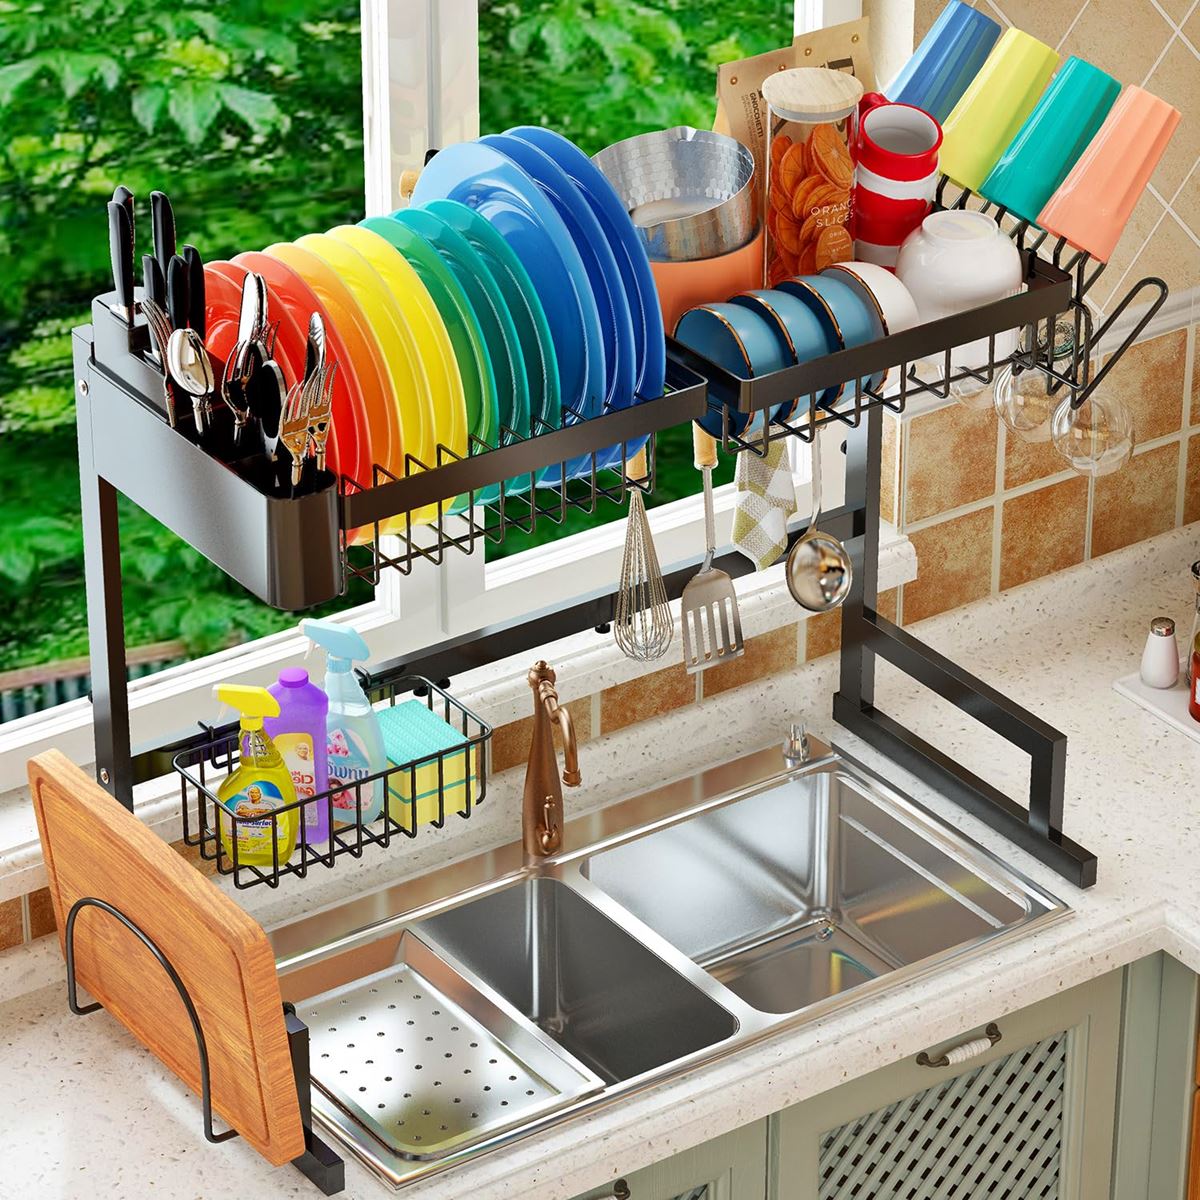 romision Dish Drying Rack, 304 Stainless Steel 2 Tier Large Dish Rack and  Drainboard Set with Swivel Spout Drainage, Full Size